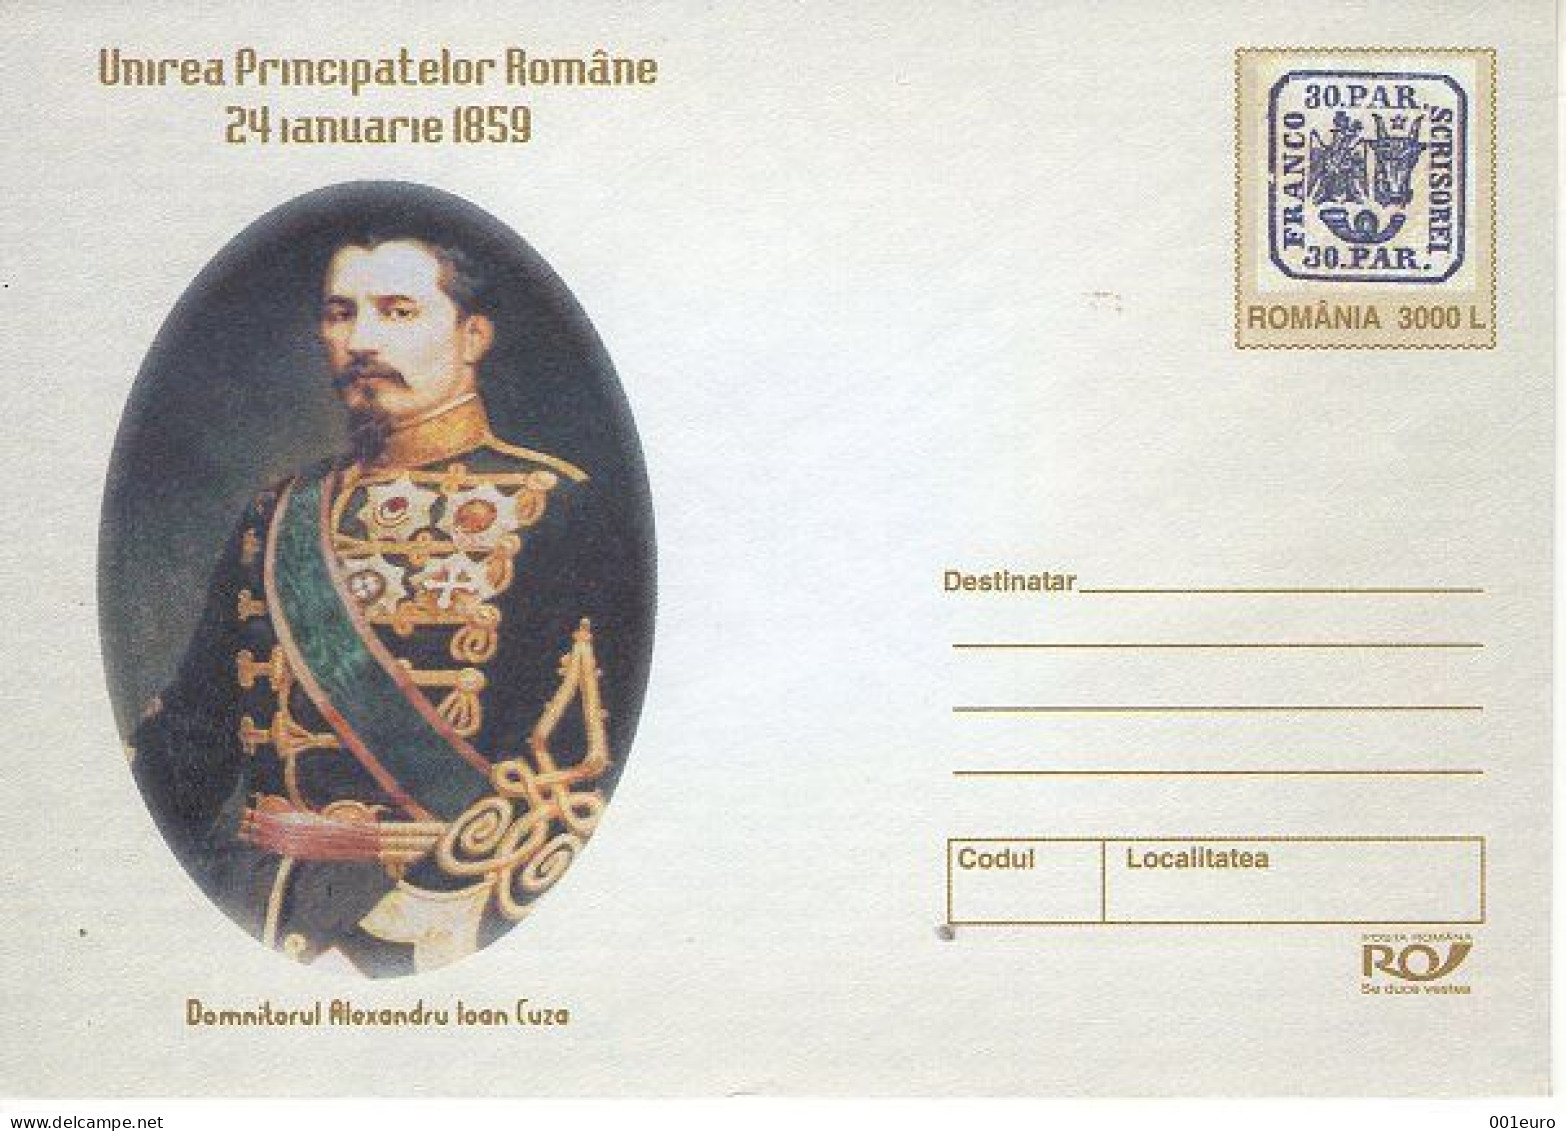 ROMANIA 026y2003: I. C. CUZA, Unused Prepaid Postal Stationery Cover - Registered Shipping! - Entiers Postaux